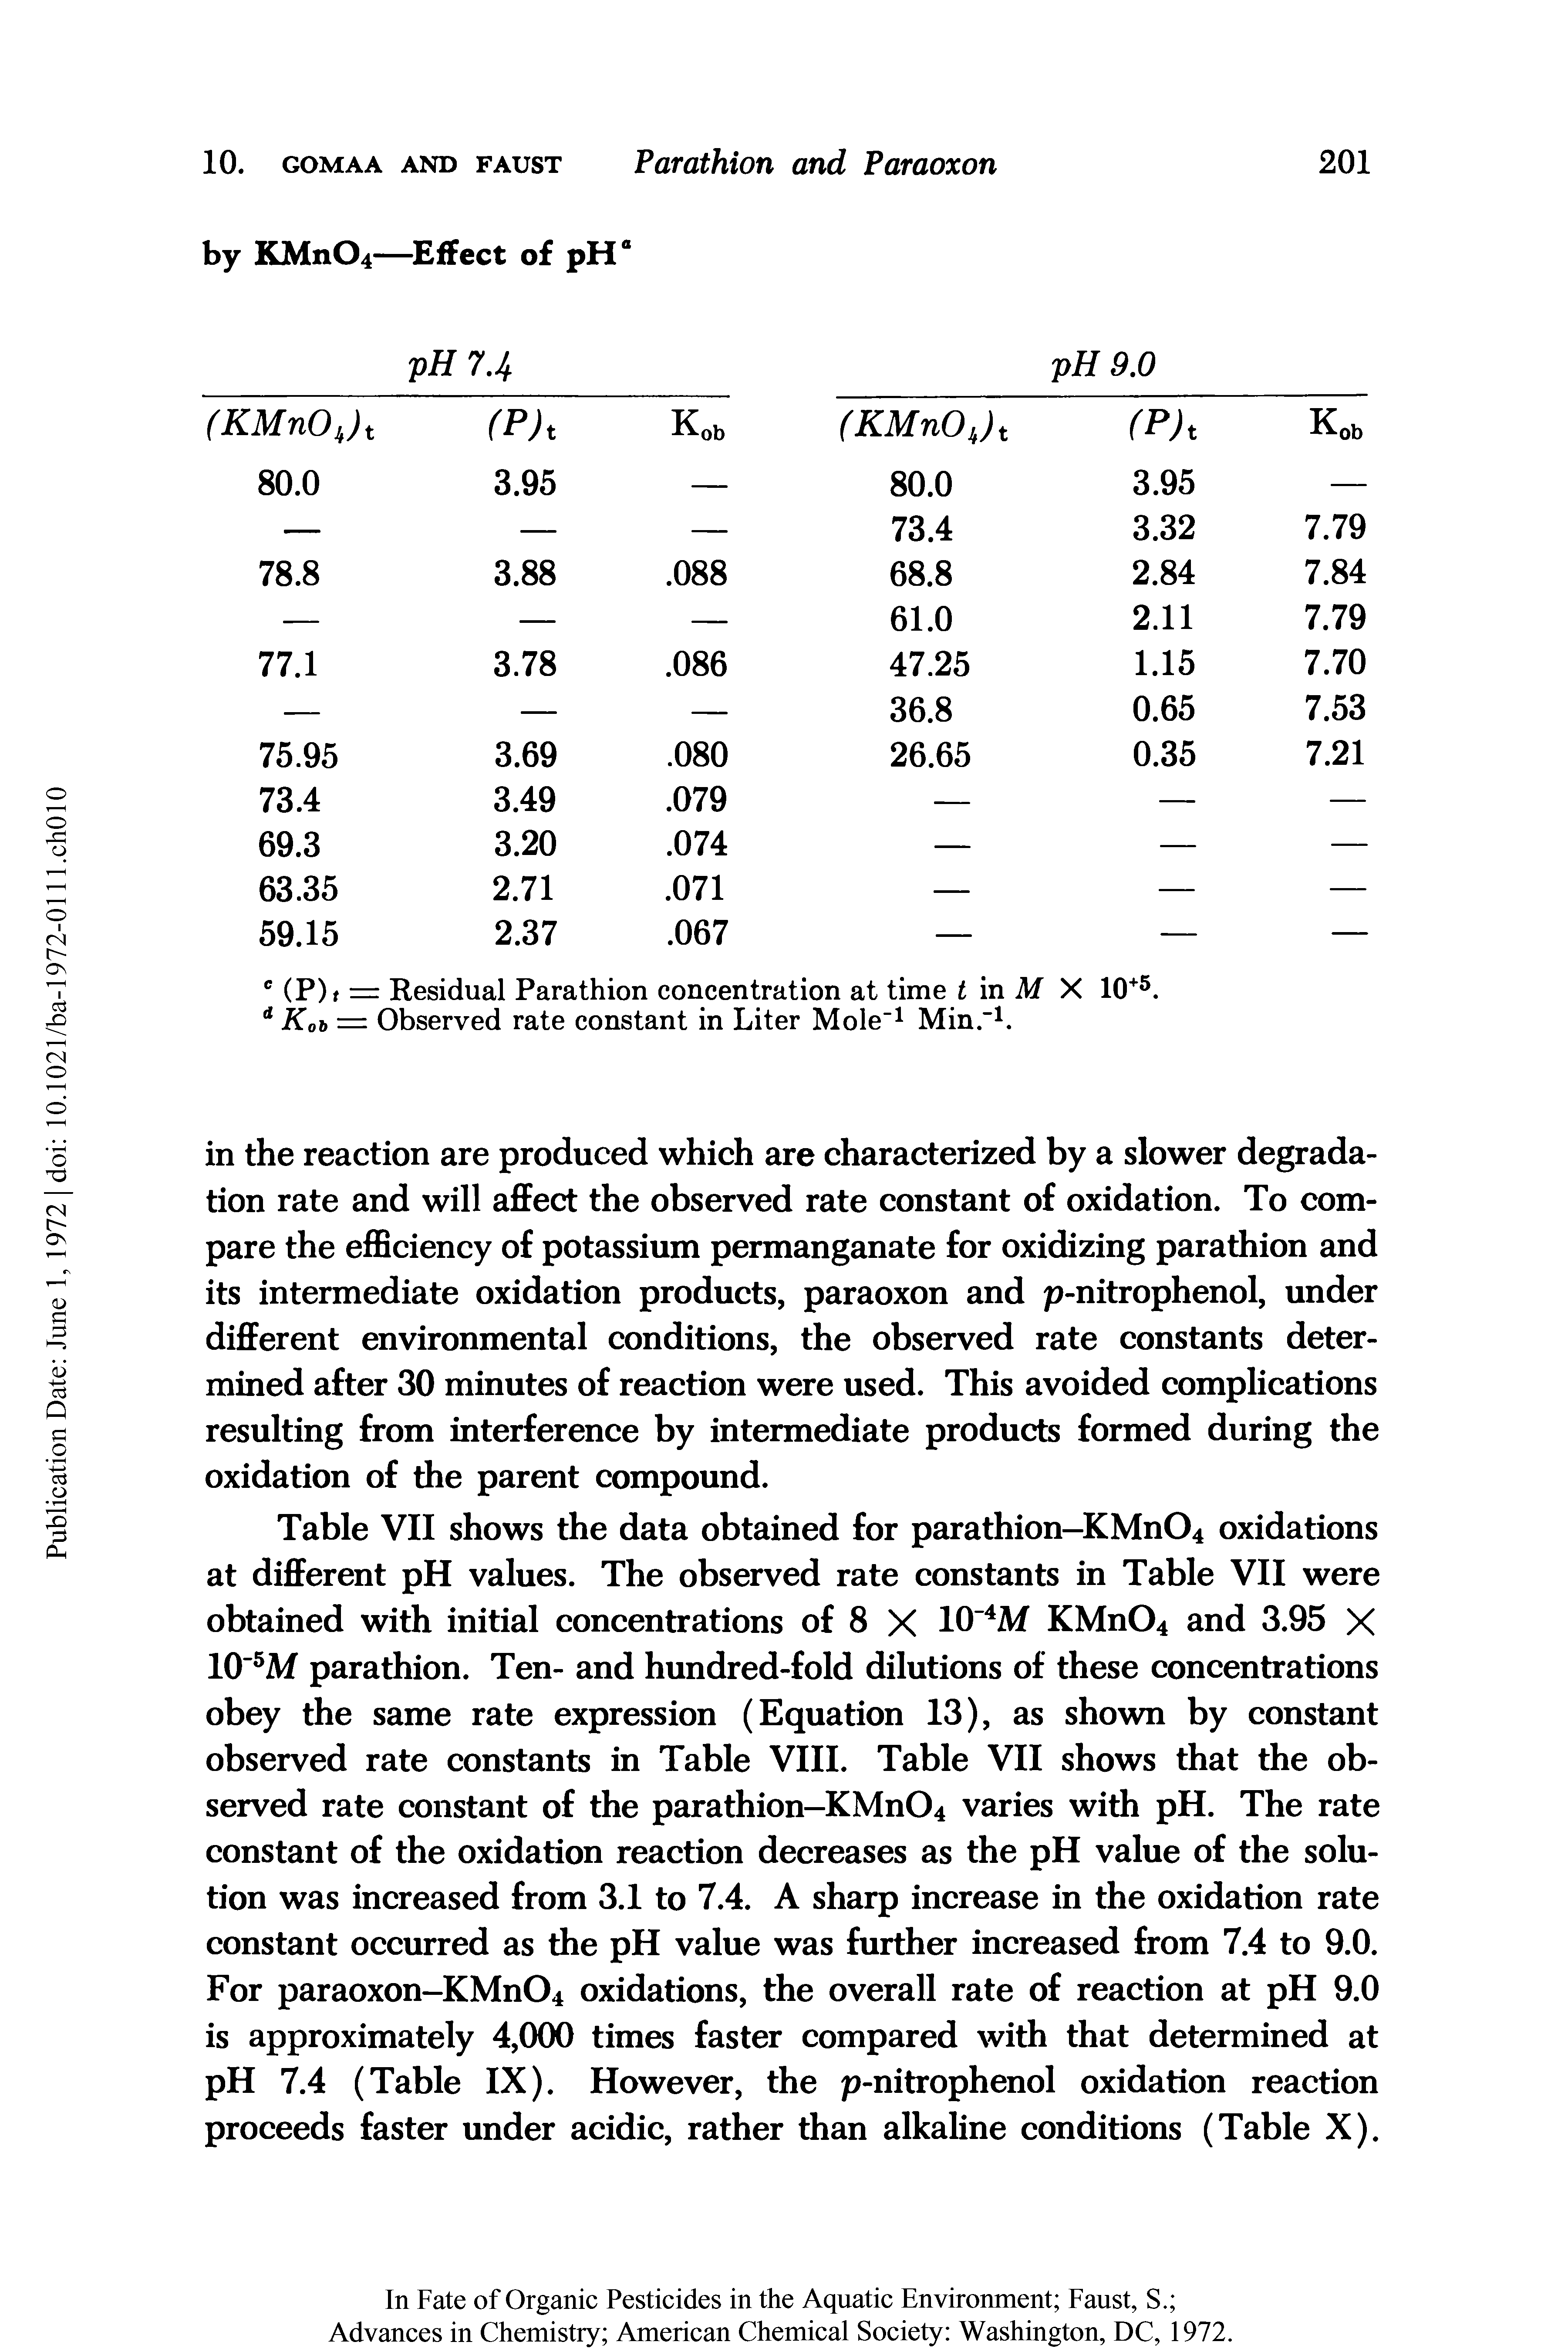 Table VII shows the data obtained for parathion-KMn04 oxidations at diflFerent pH values. The observed rate constants in Table VII were obtained with initial concentrations of 8 X lO M KMn04 and 3.95 X lO M parathion. Ten- and hundred-fold dilutions of these concentrations obey the same rate expression (Equation 13), as shown by constant observed rate constants in Table VIII. Table VII shows that the observed rate constant of the parathion-KMn04 varies with pH. The rate constant of the oxidation reaction decreases as the pH value of the solution was increased from 3.1 to 7.4. A sharp increase in the oxidation rate constant occurred as the pH value was further increased from 7.4 to 9.0. For paraoxon-KMn04 oxidations, the overall rate of reaction at pH 9.0 is approximately 4,000 times faster compared with that determined at pH 7.4 (Table IX). However, the p-nitrophenol oxidation reaction proceeds faster under acidic, rather than alkaline conditions (Table X).